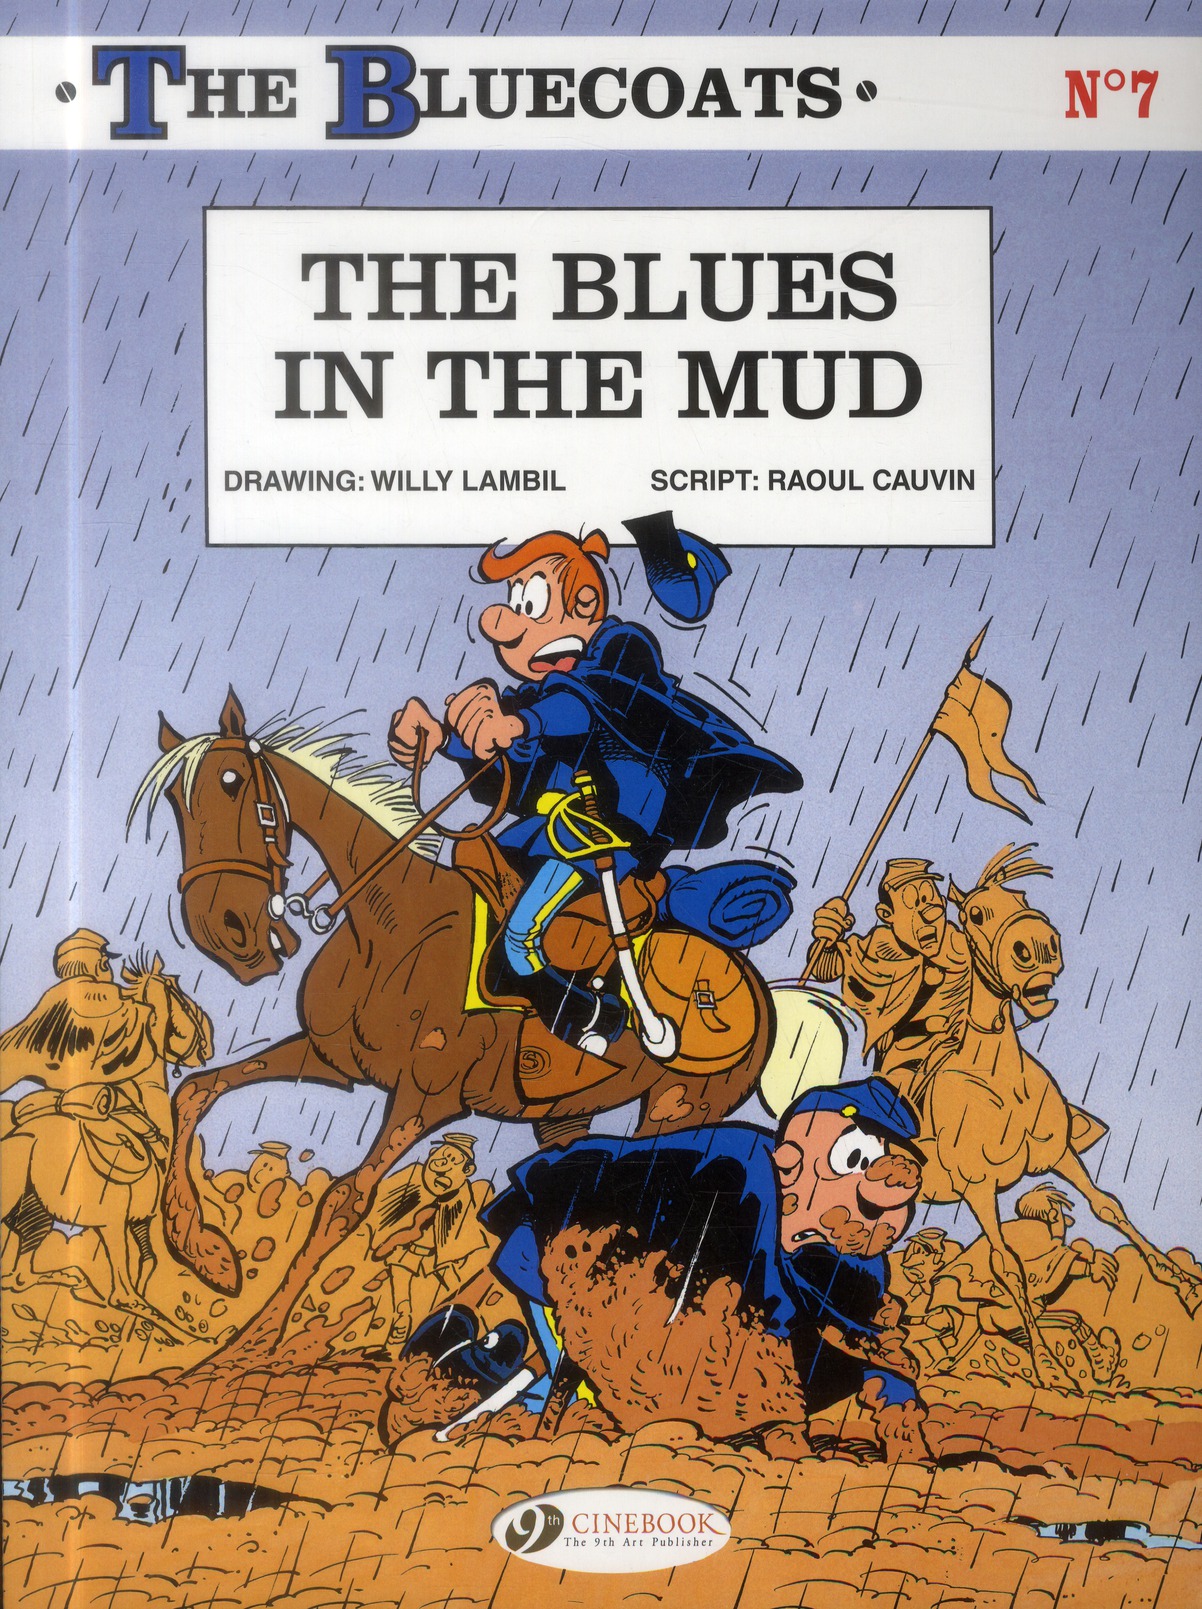 THE BLUECOATS - TOME 7 THE BLUES IN THE MUD - VOL07